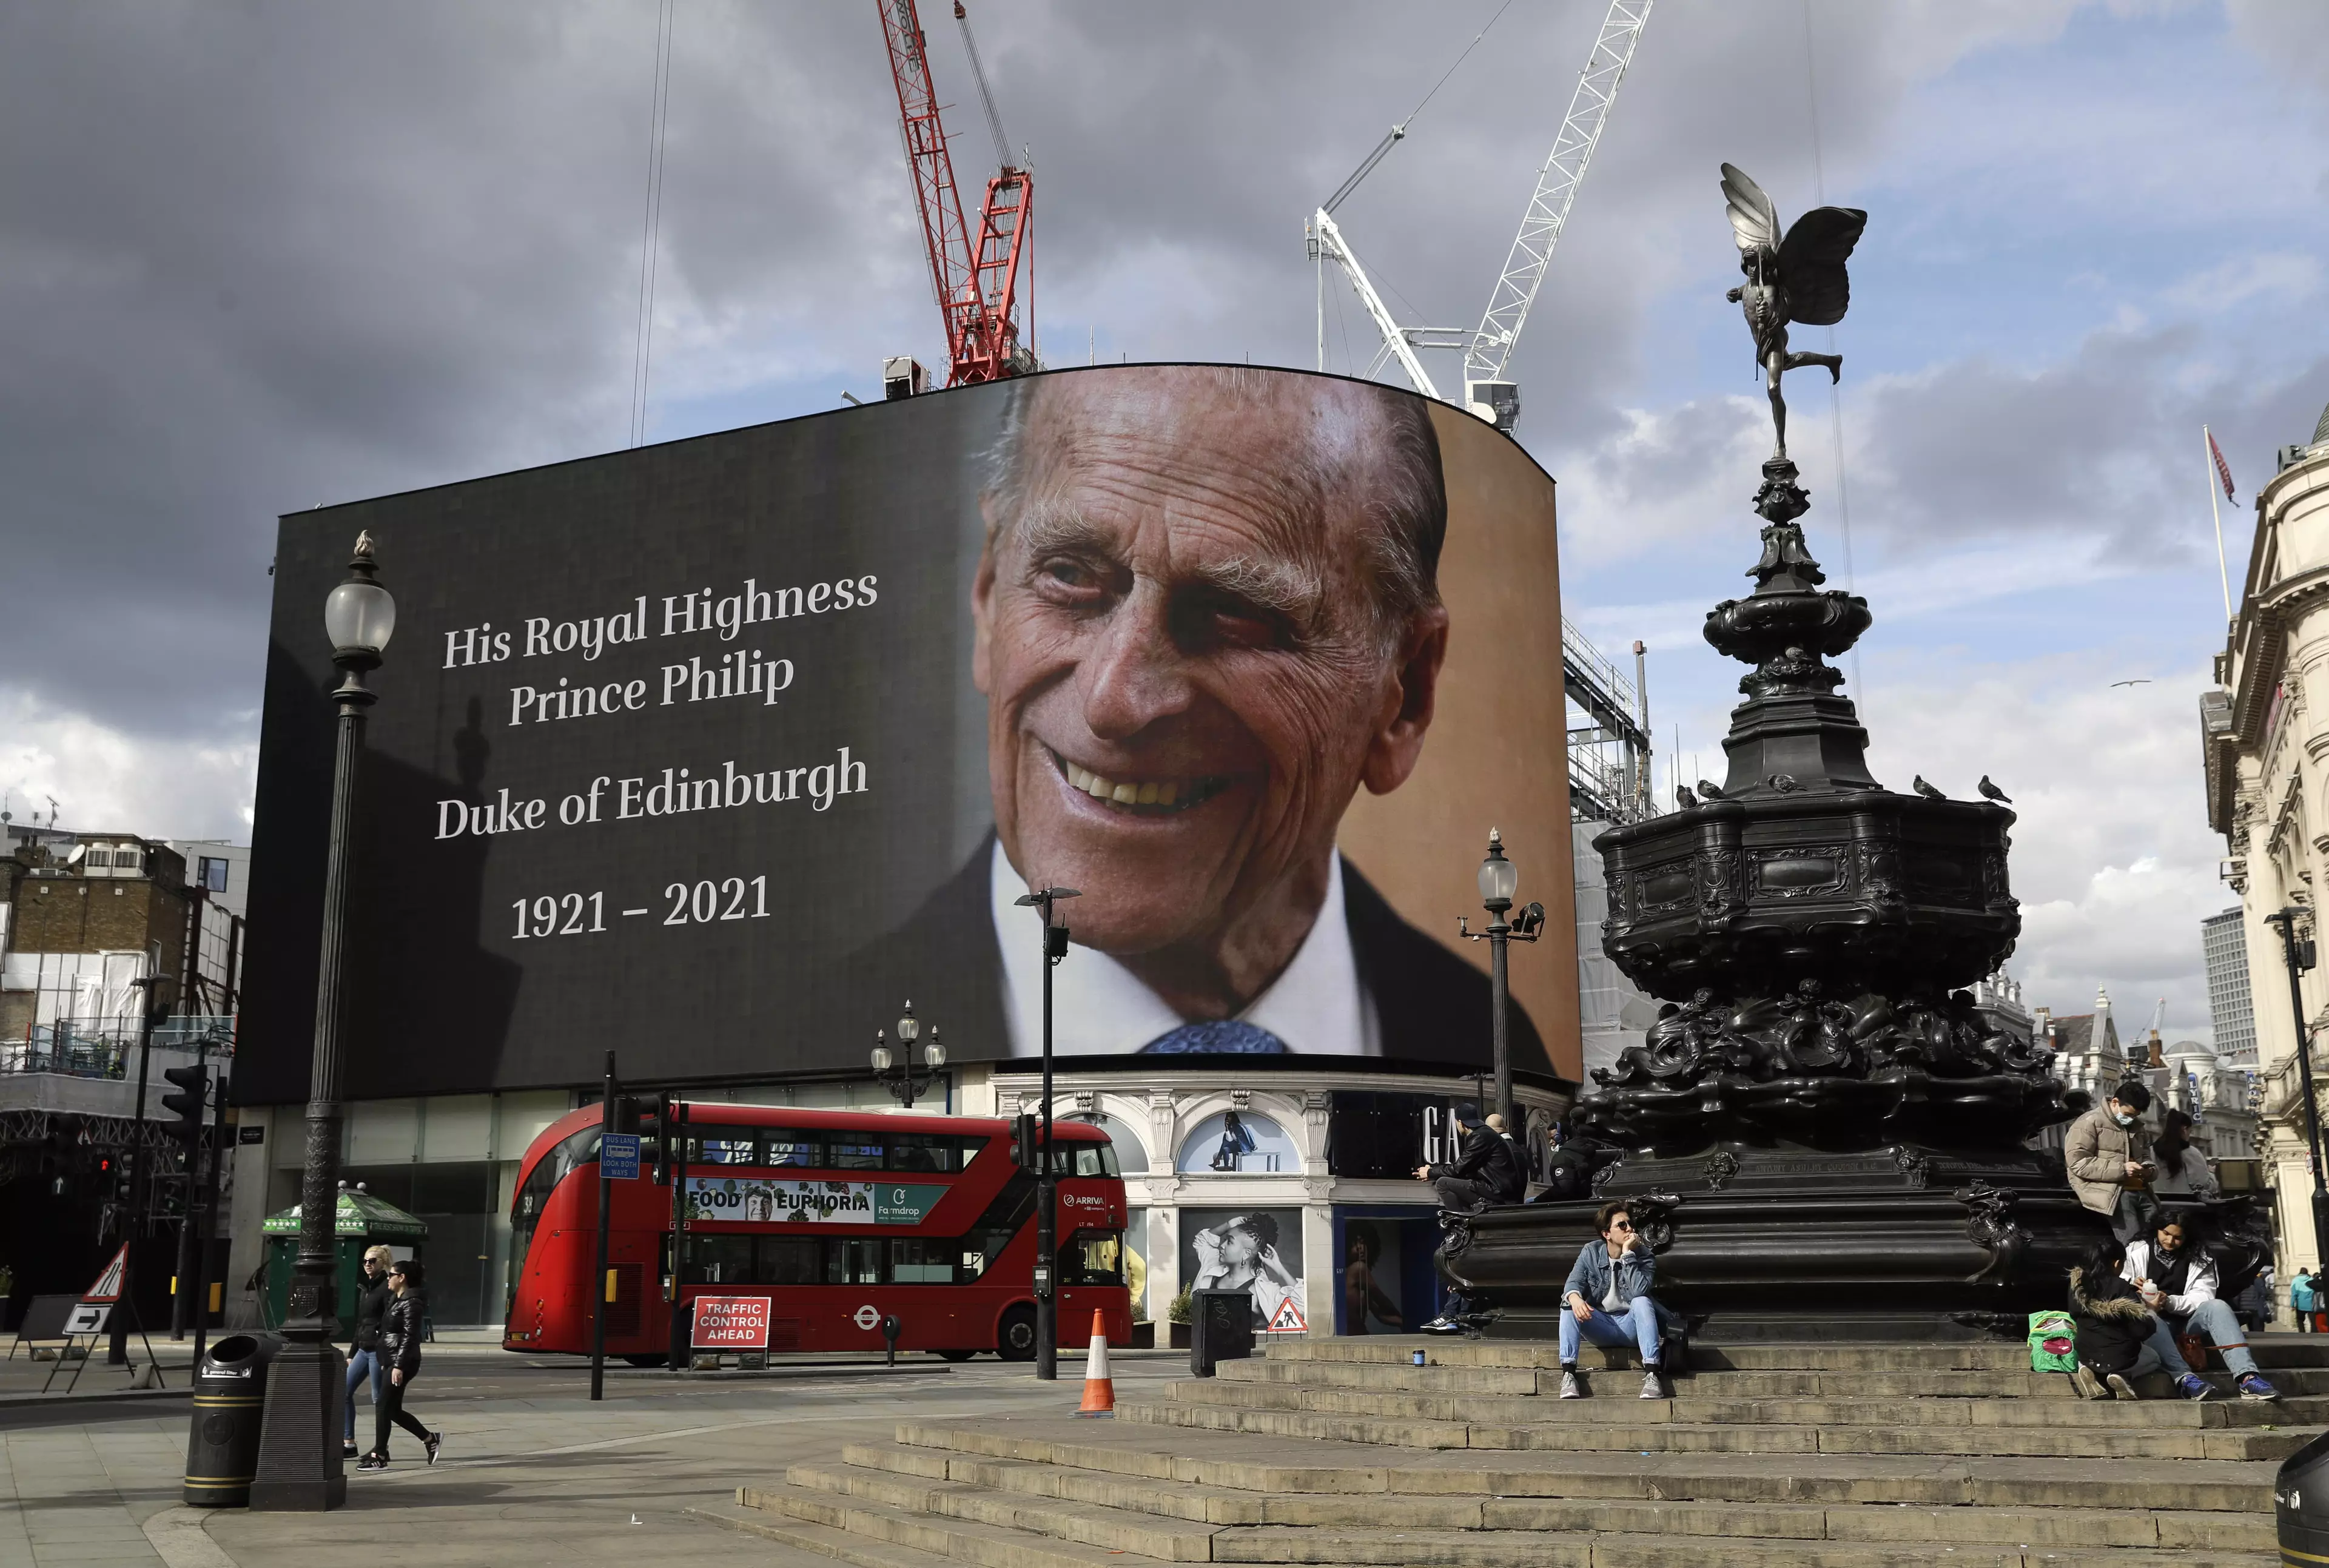 Prince Philip died at the age of 99.